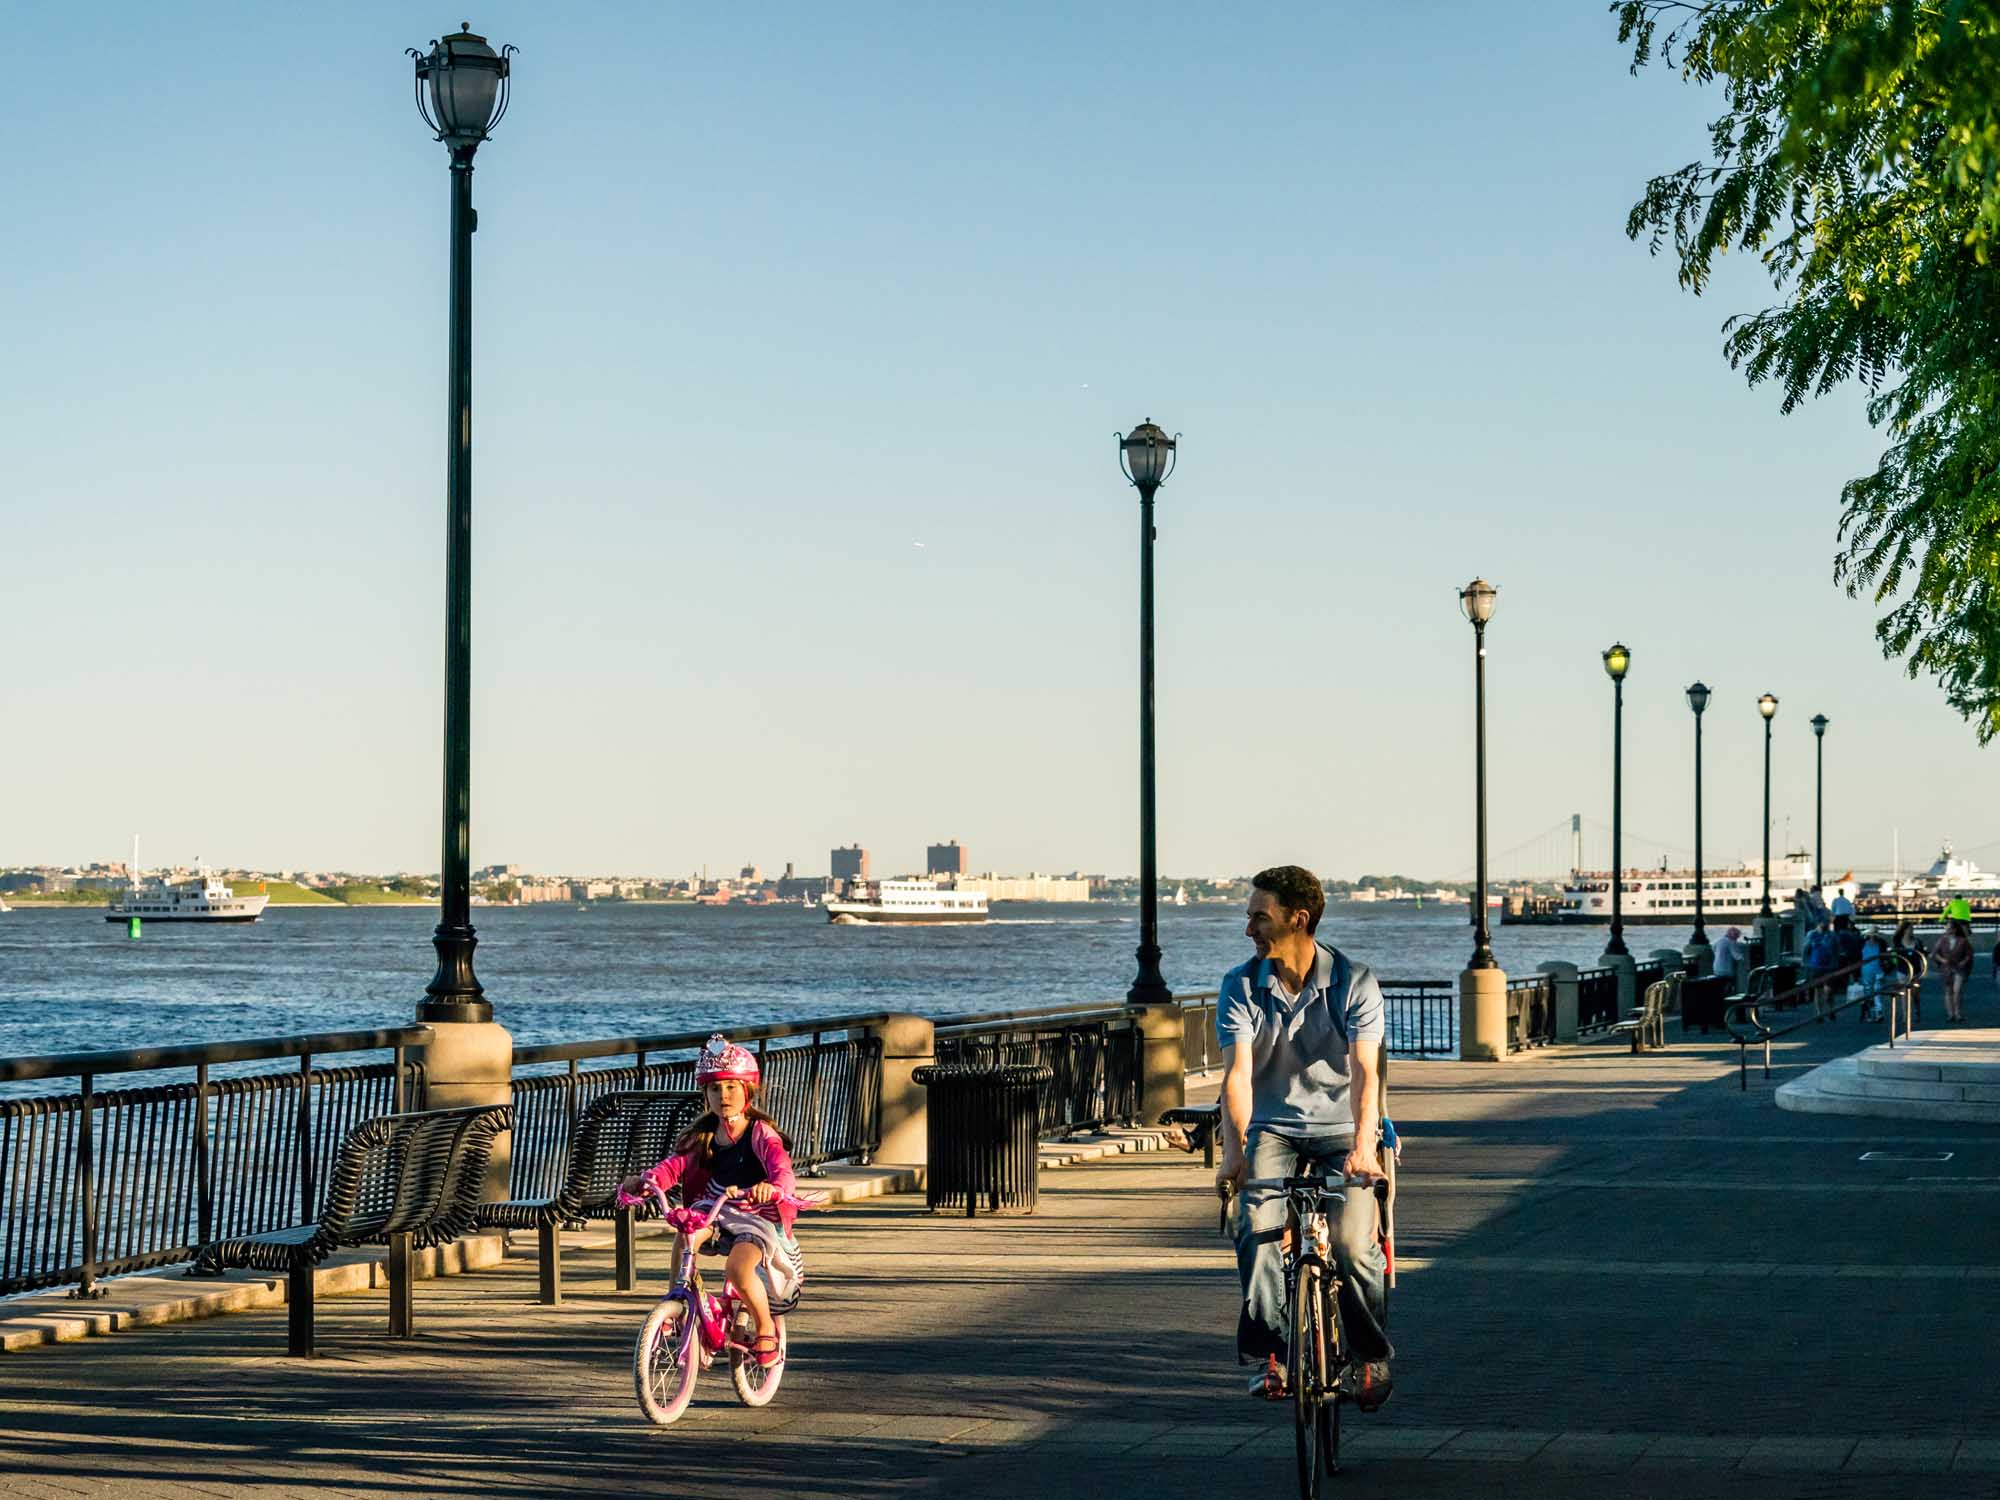 Father and daughter riding bikes along Hudson river waterfront with ferry ships on the water.